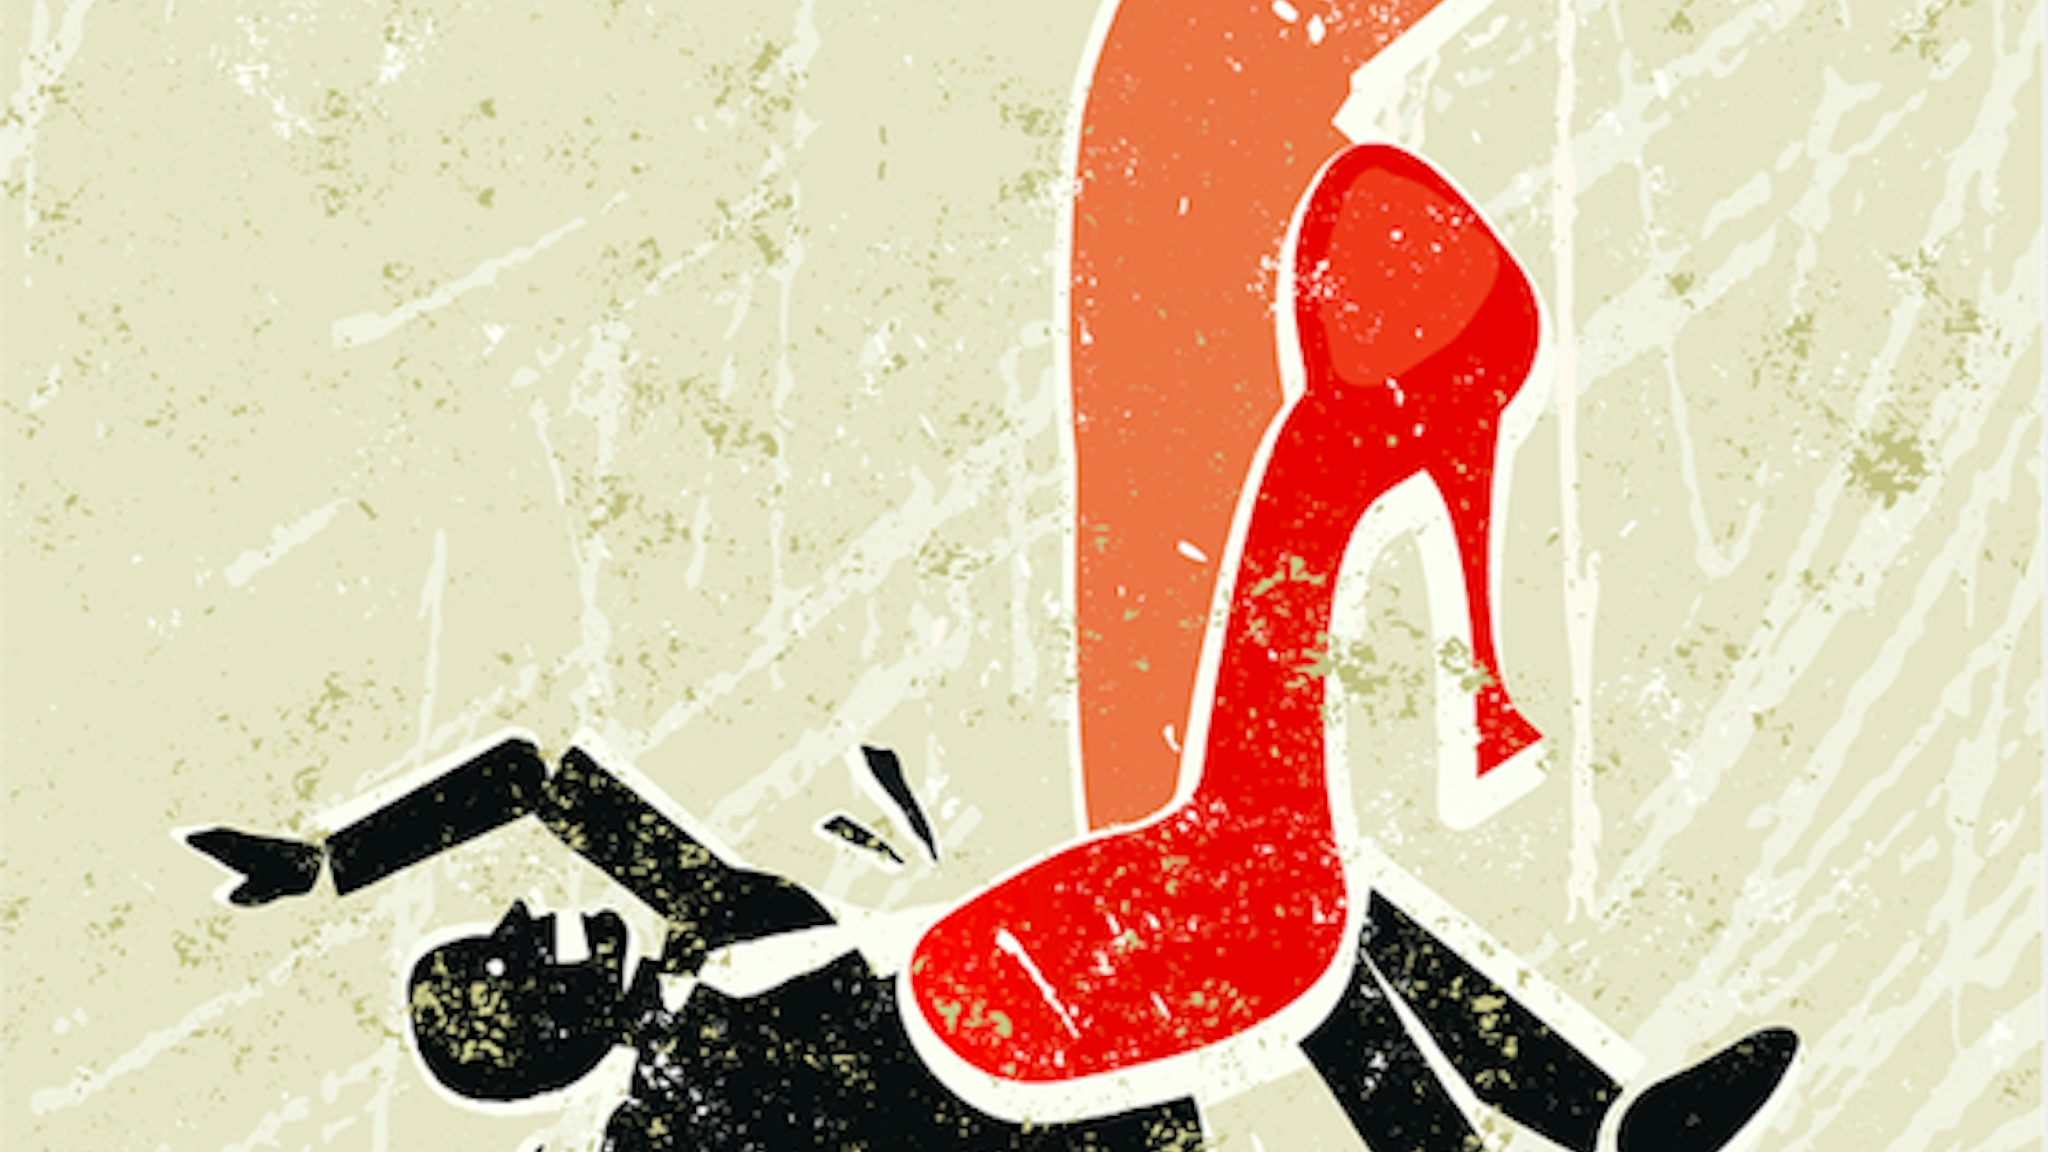 Girl Power! A stylized vector cartoon of a beautiful woman's leg crushing a man under her very high red heels,reminiscent of an old screen print poster and suggesting battle of the sexes, relationship issues, seduction, and putting your foot down.